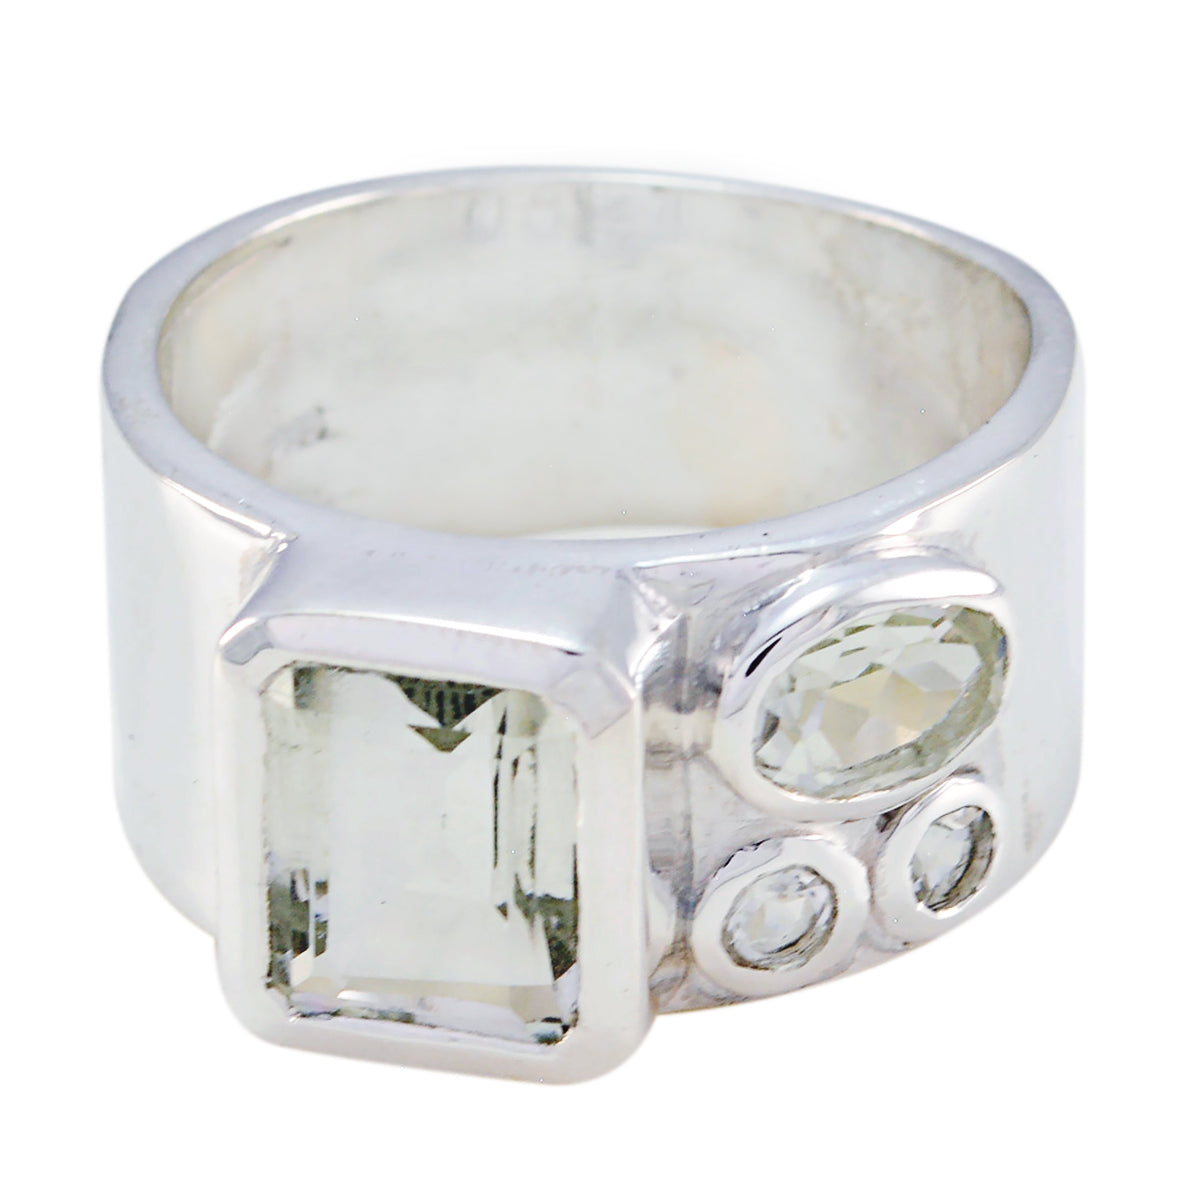 Rajasthan Gem Green Amethyst Sterling Silver Ring Indian Bridal Jewelry